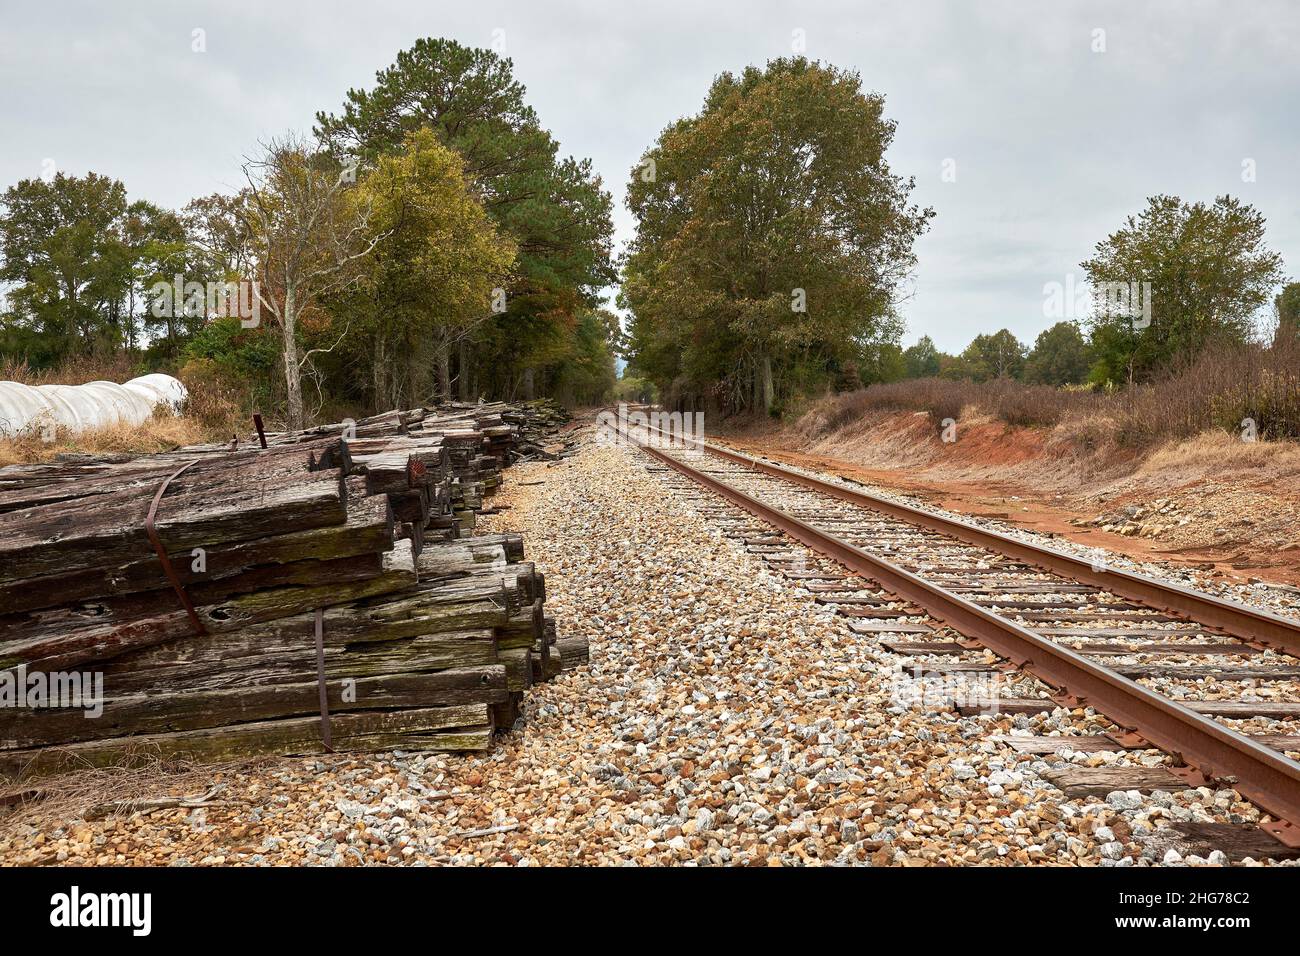 Railroad train tracks lead into the distance with old discarded used railroad ties next to the track in Alabama, USA. Stock Photo